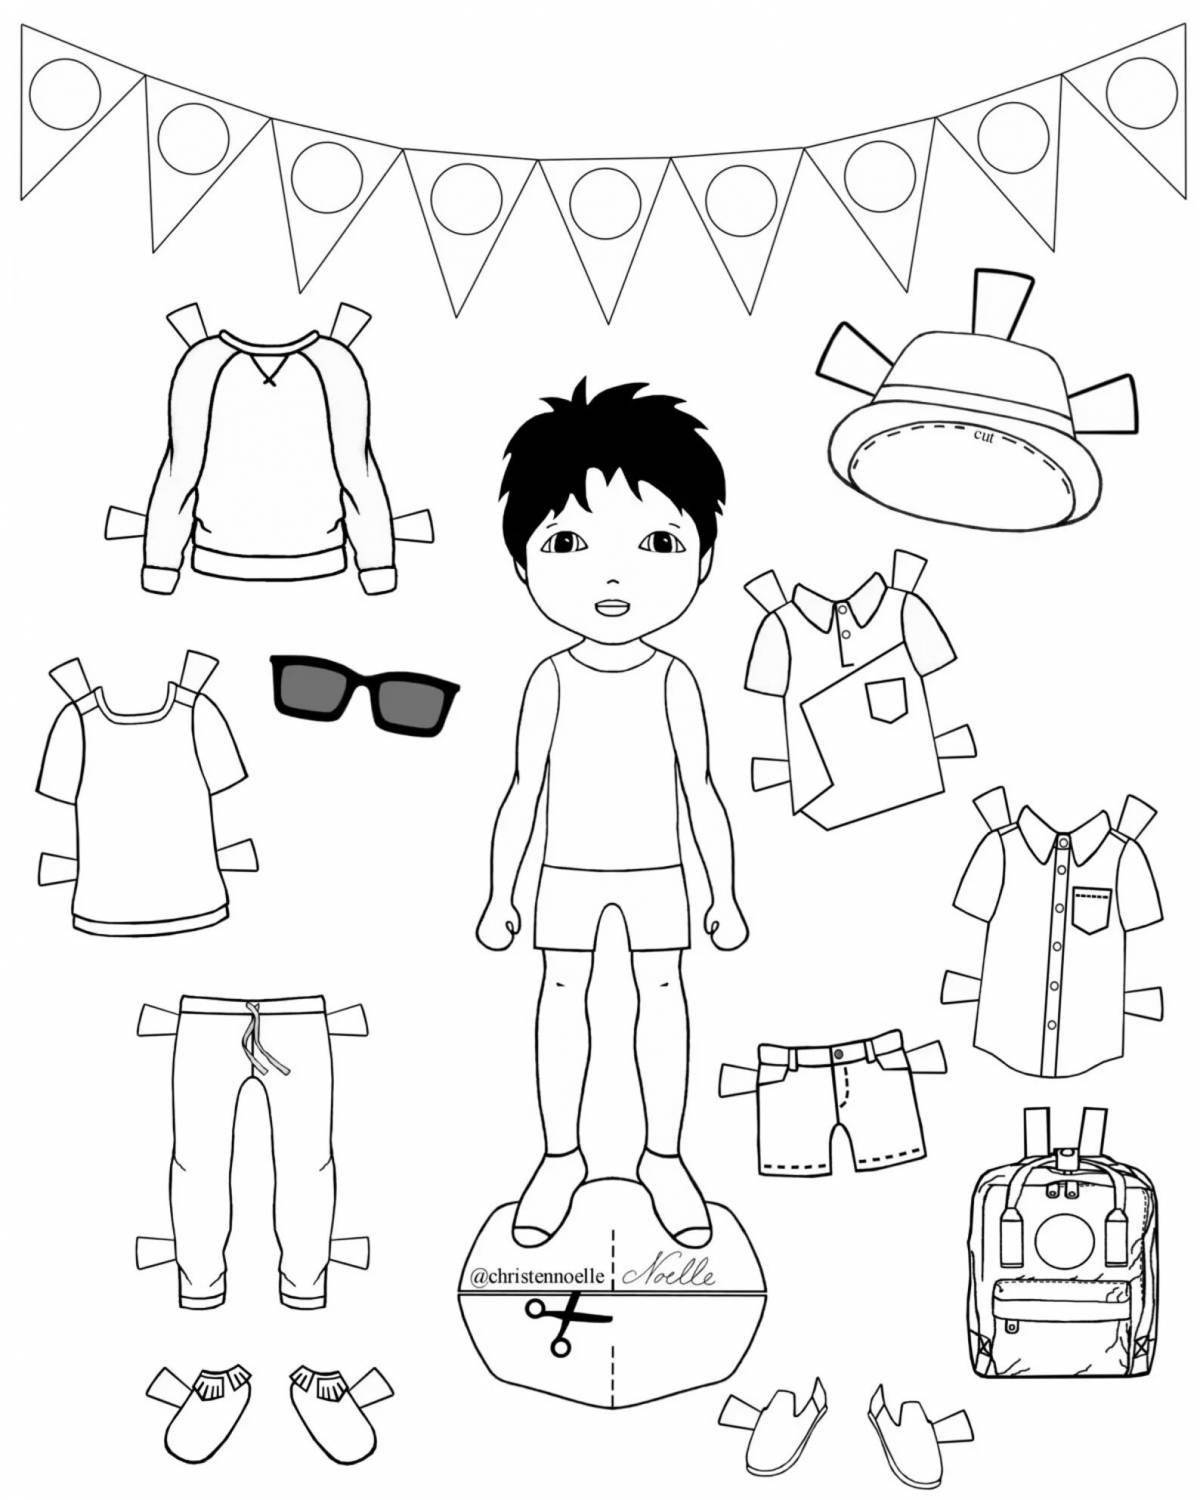 Fashion paper doll boy with clothes to cut out